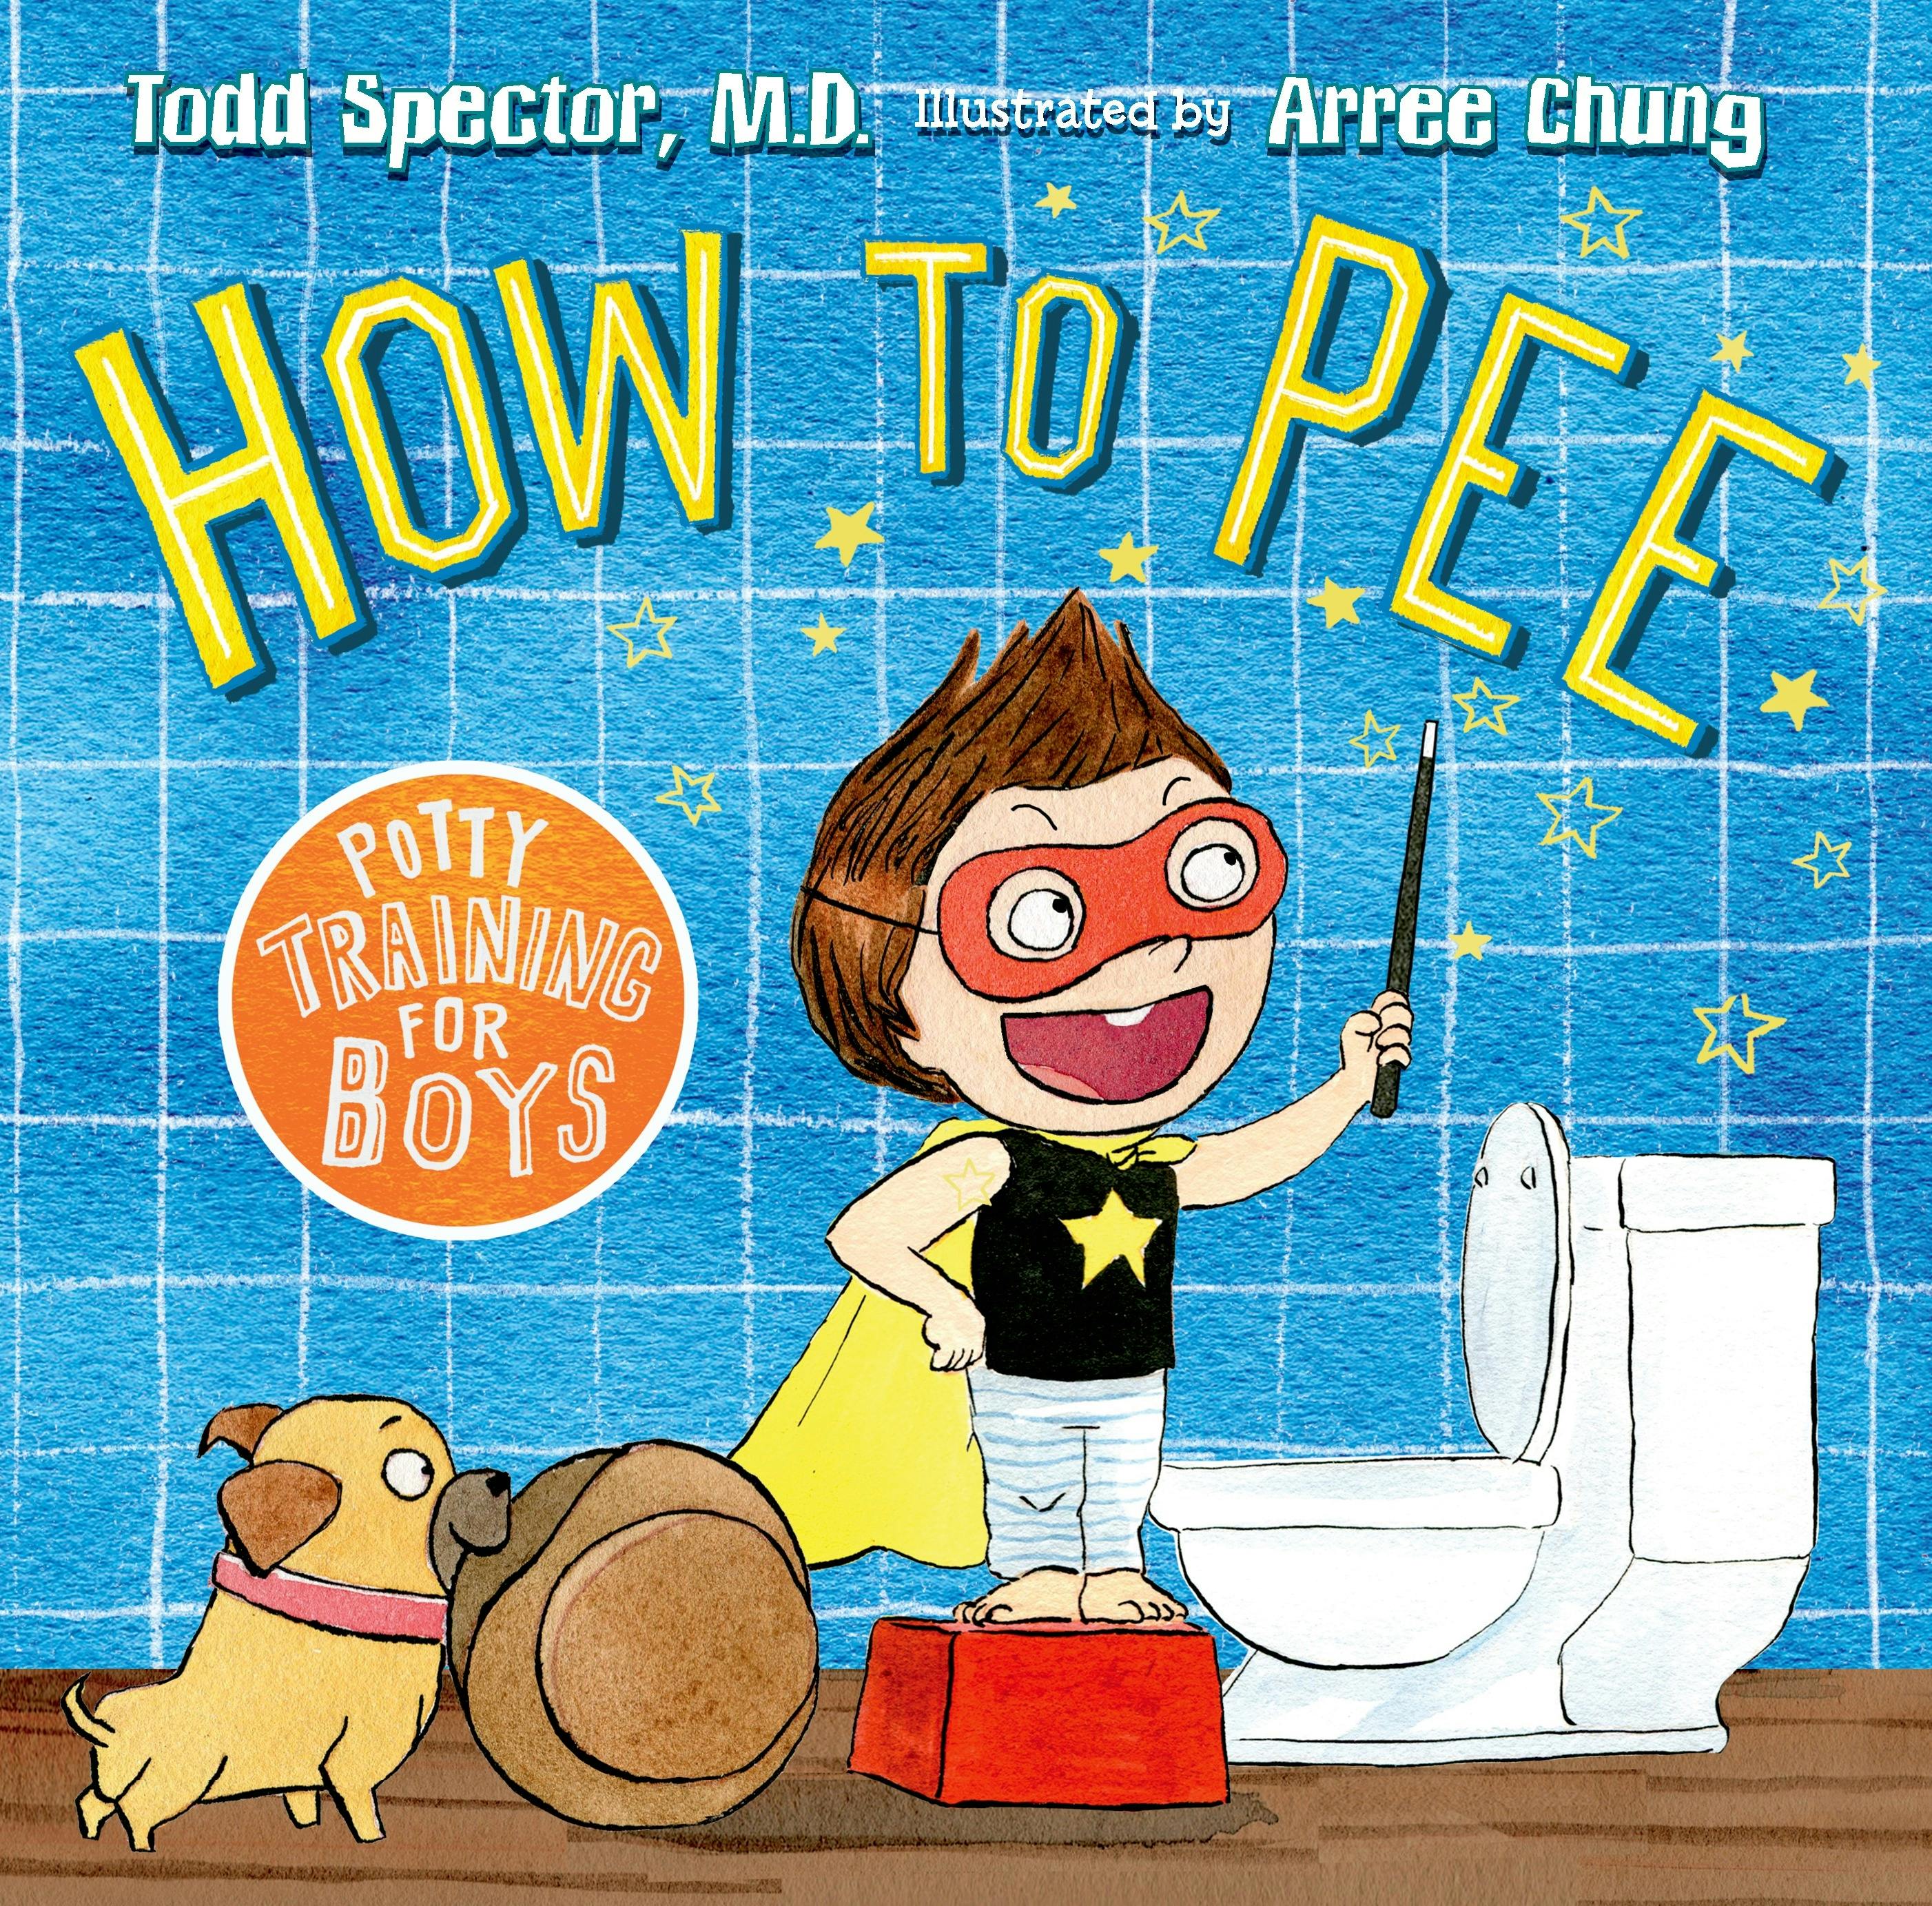 Potty Training Tips and Tricks - Janelle Rohner